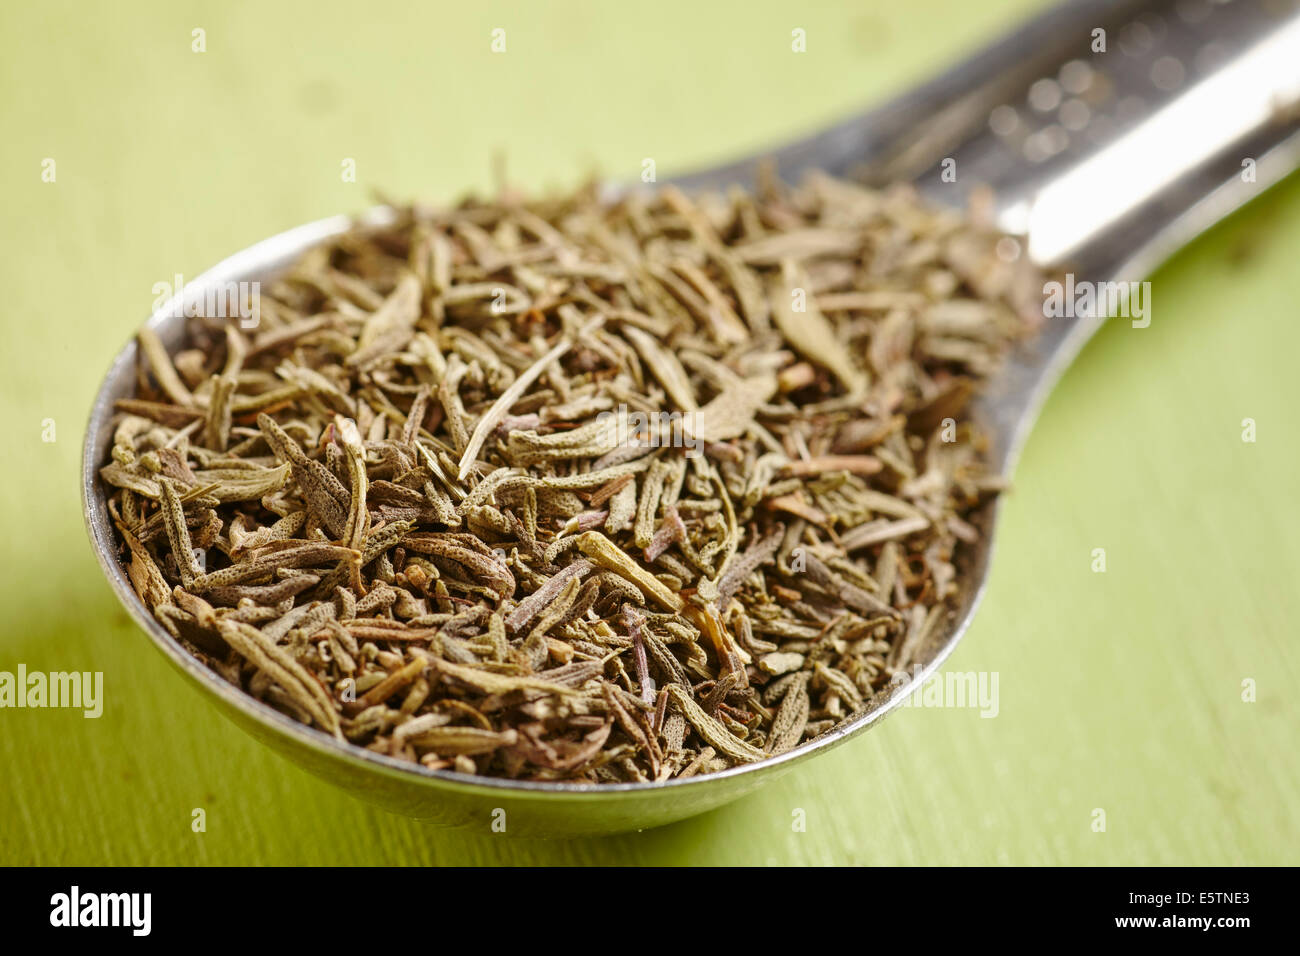 A teaspoon of dried thyme Stock Photo